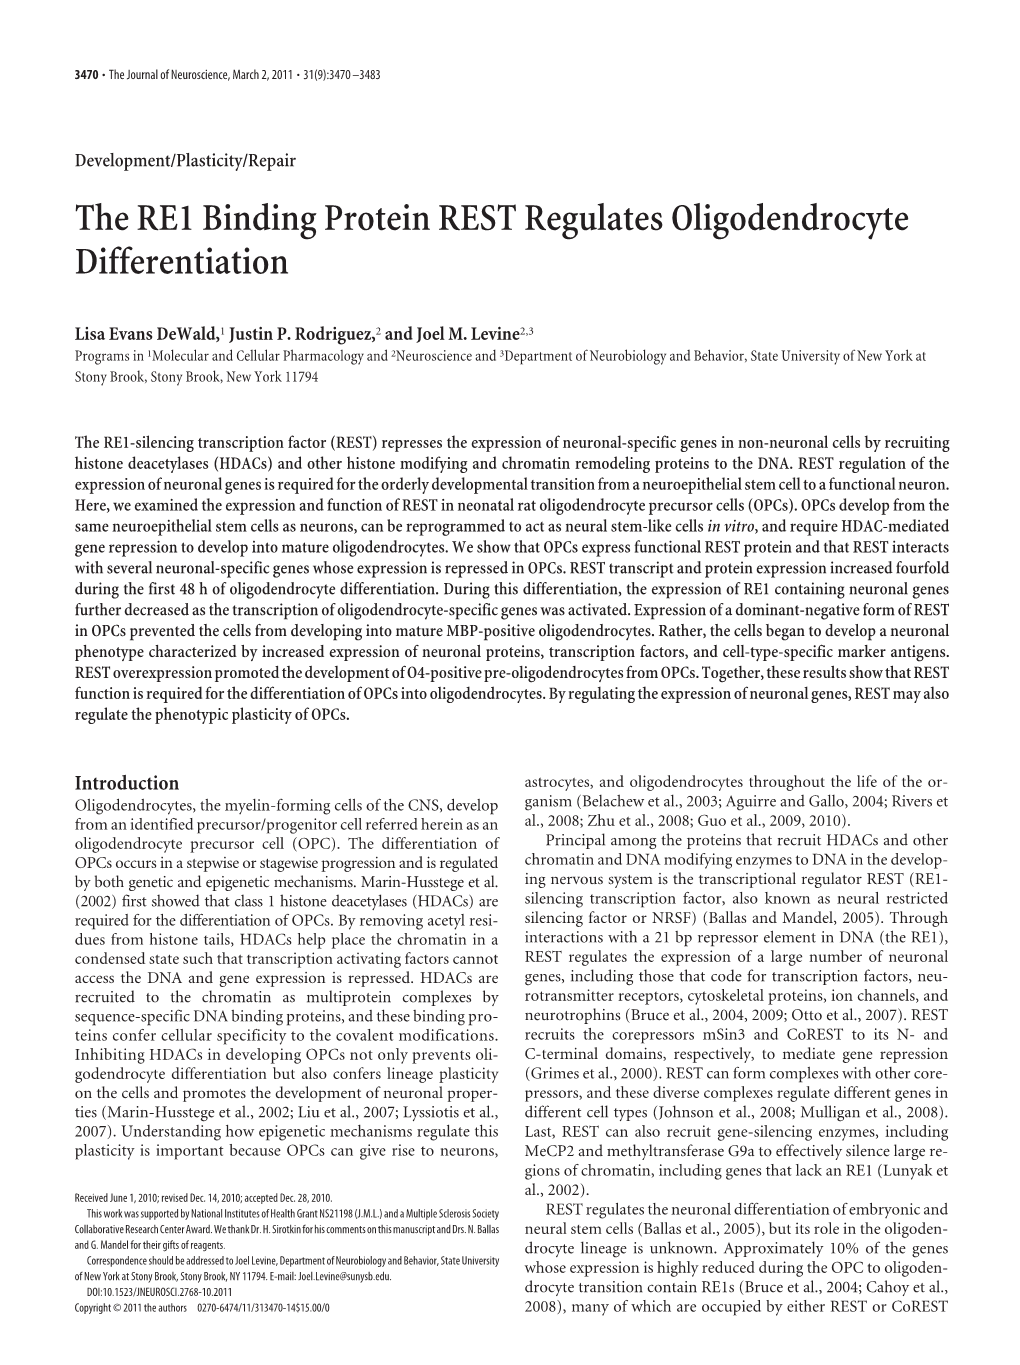 The RE1 Binding Protein REST Regulates Oligodendrocyte Differentiation